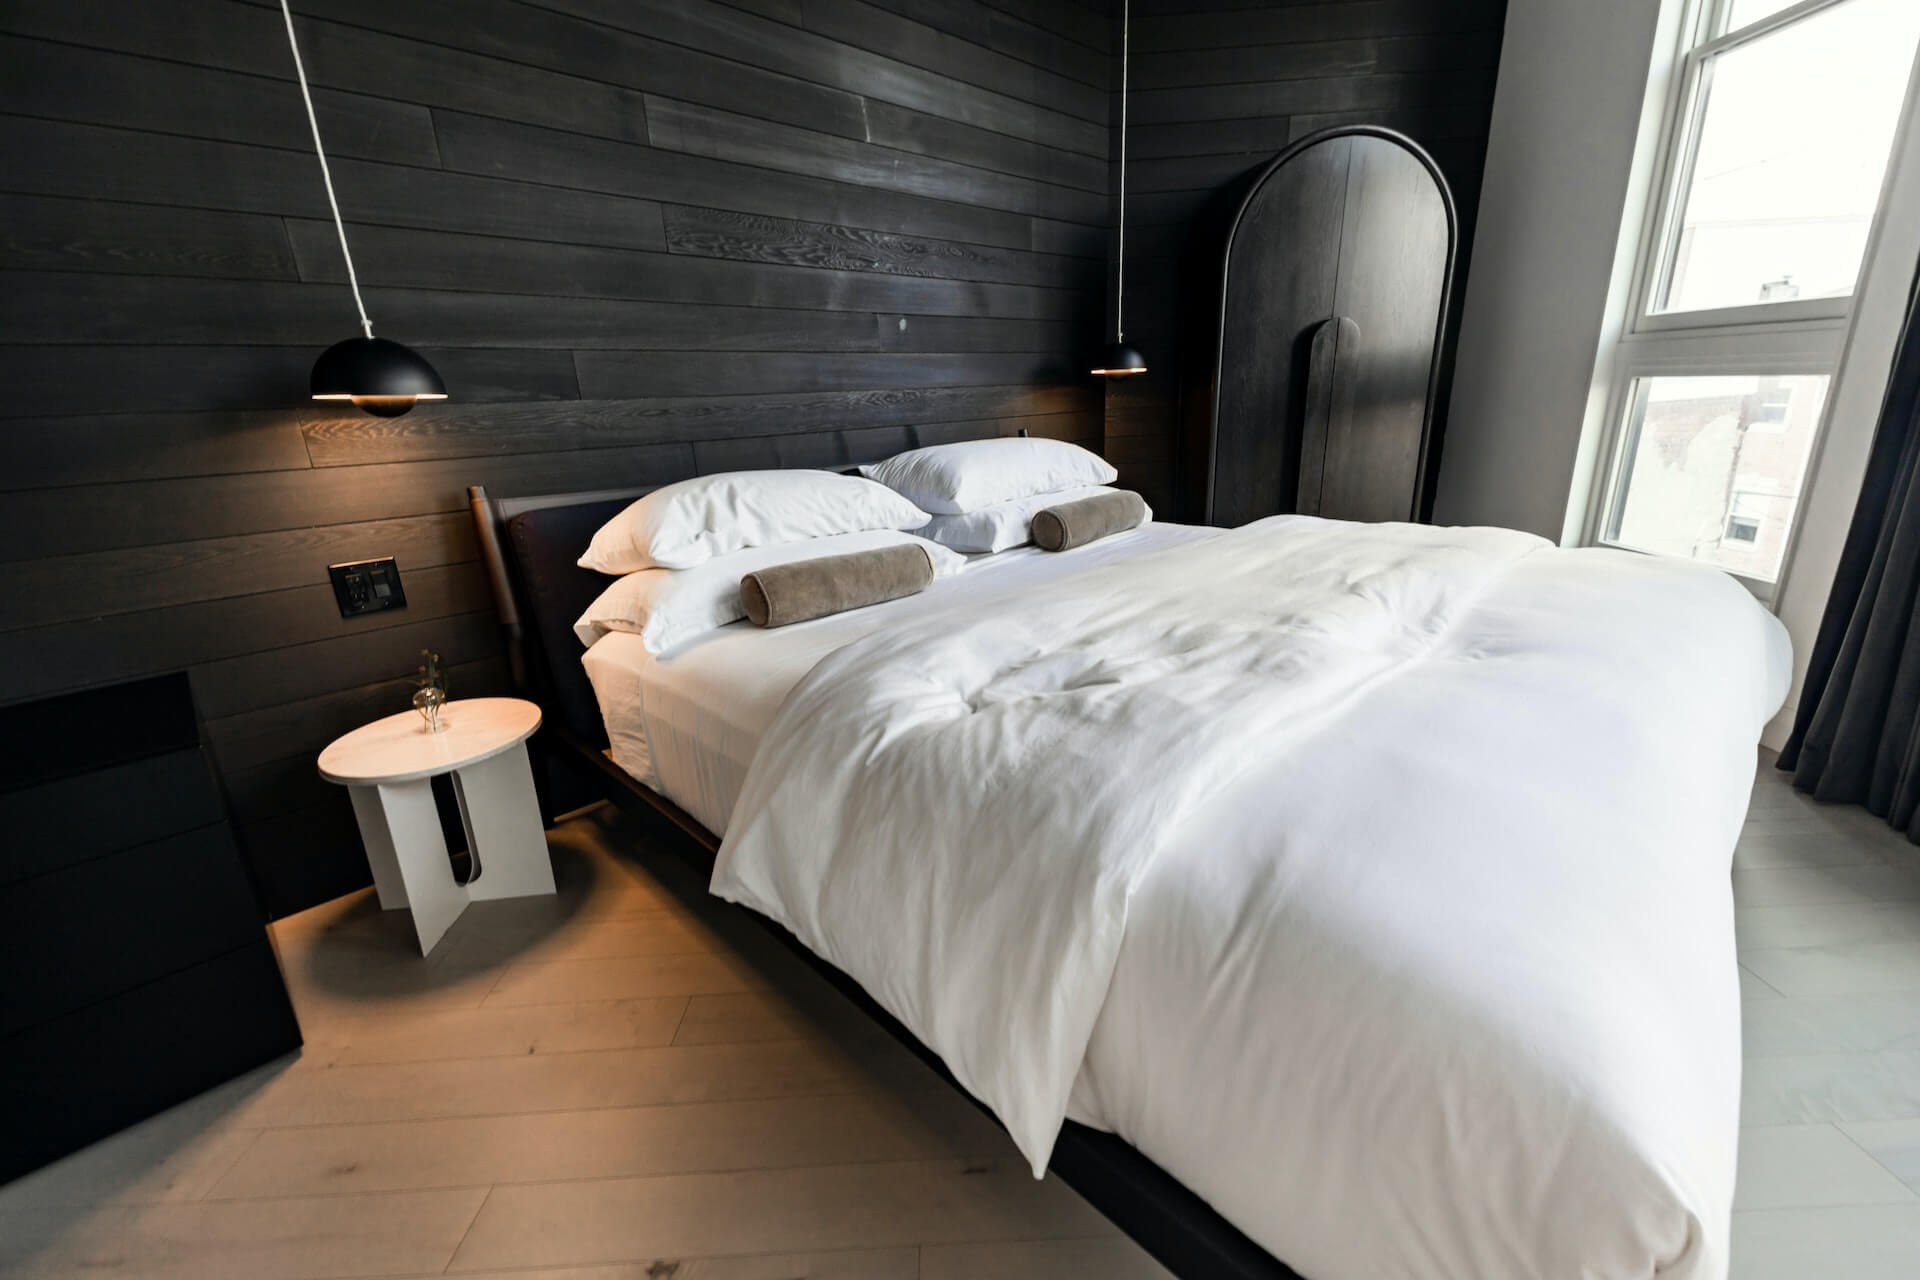 Boutique hotel room with black and white walls and linens